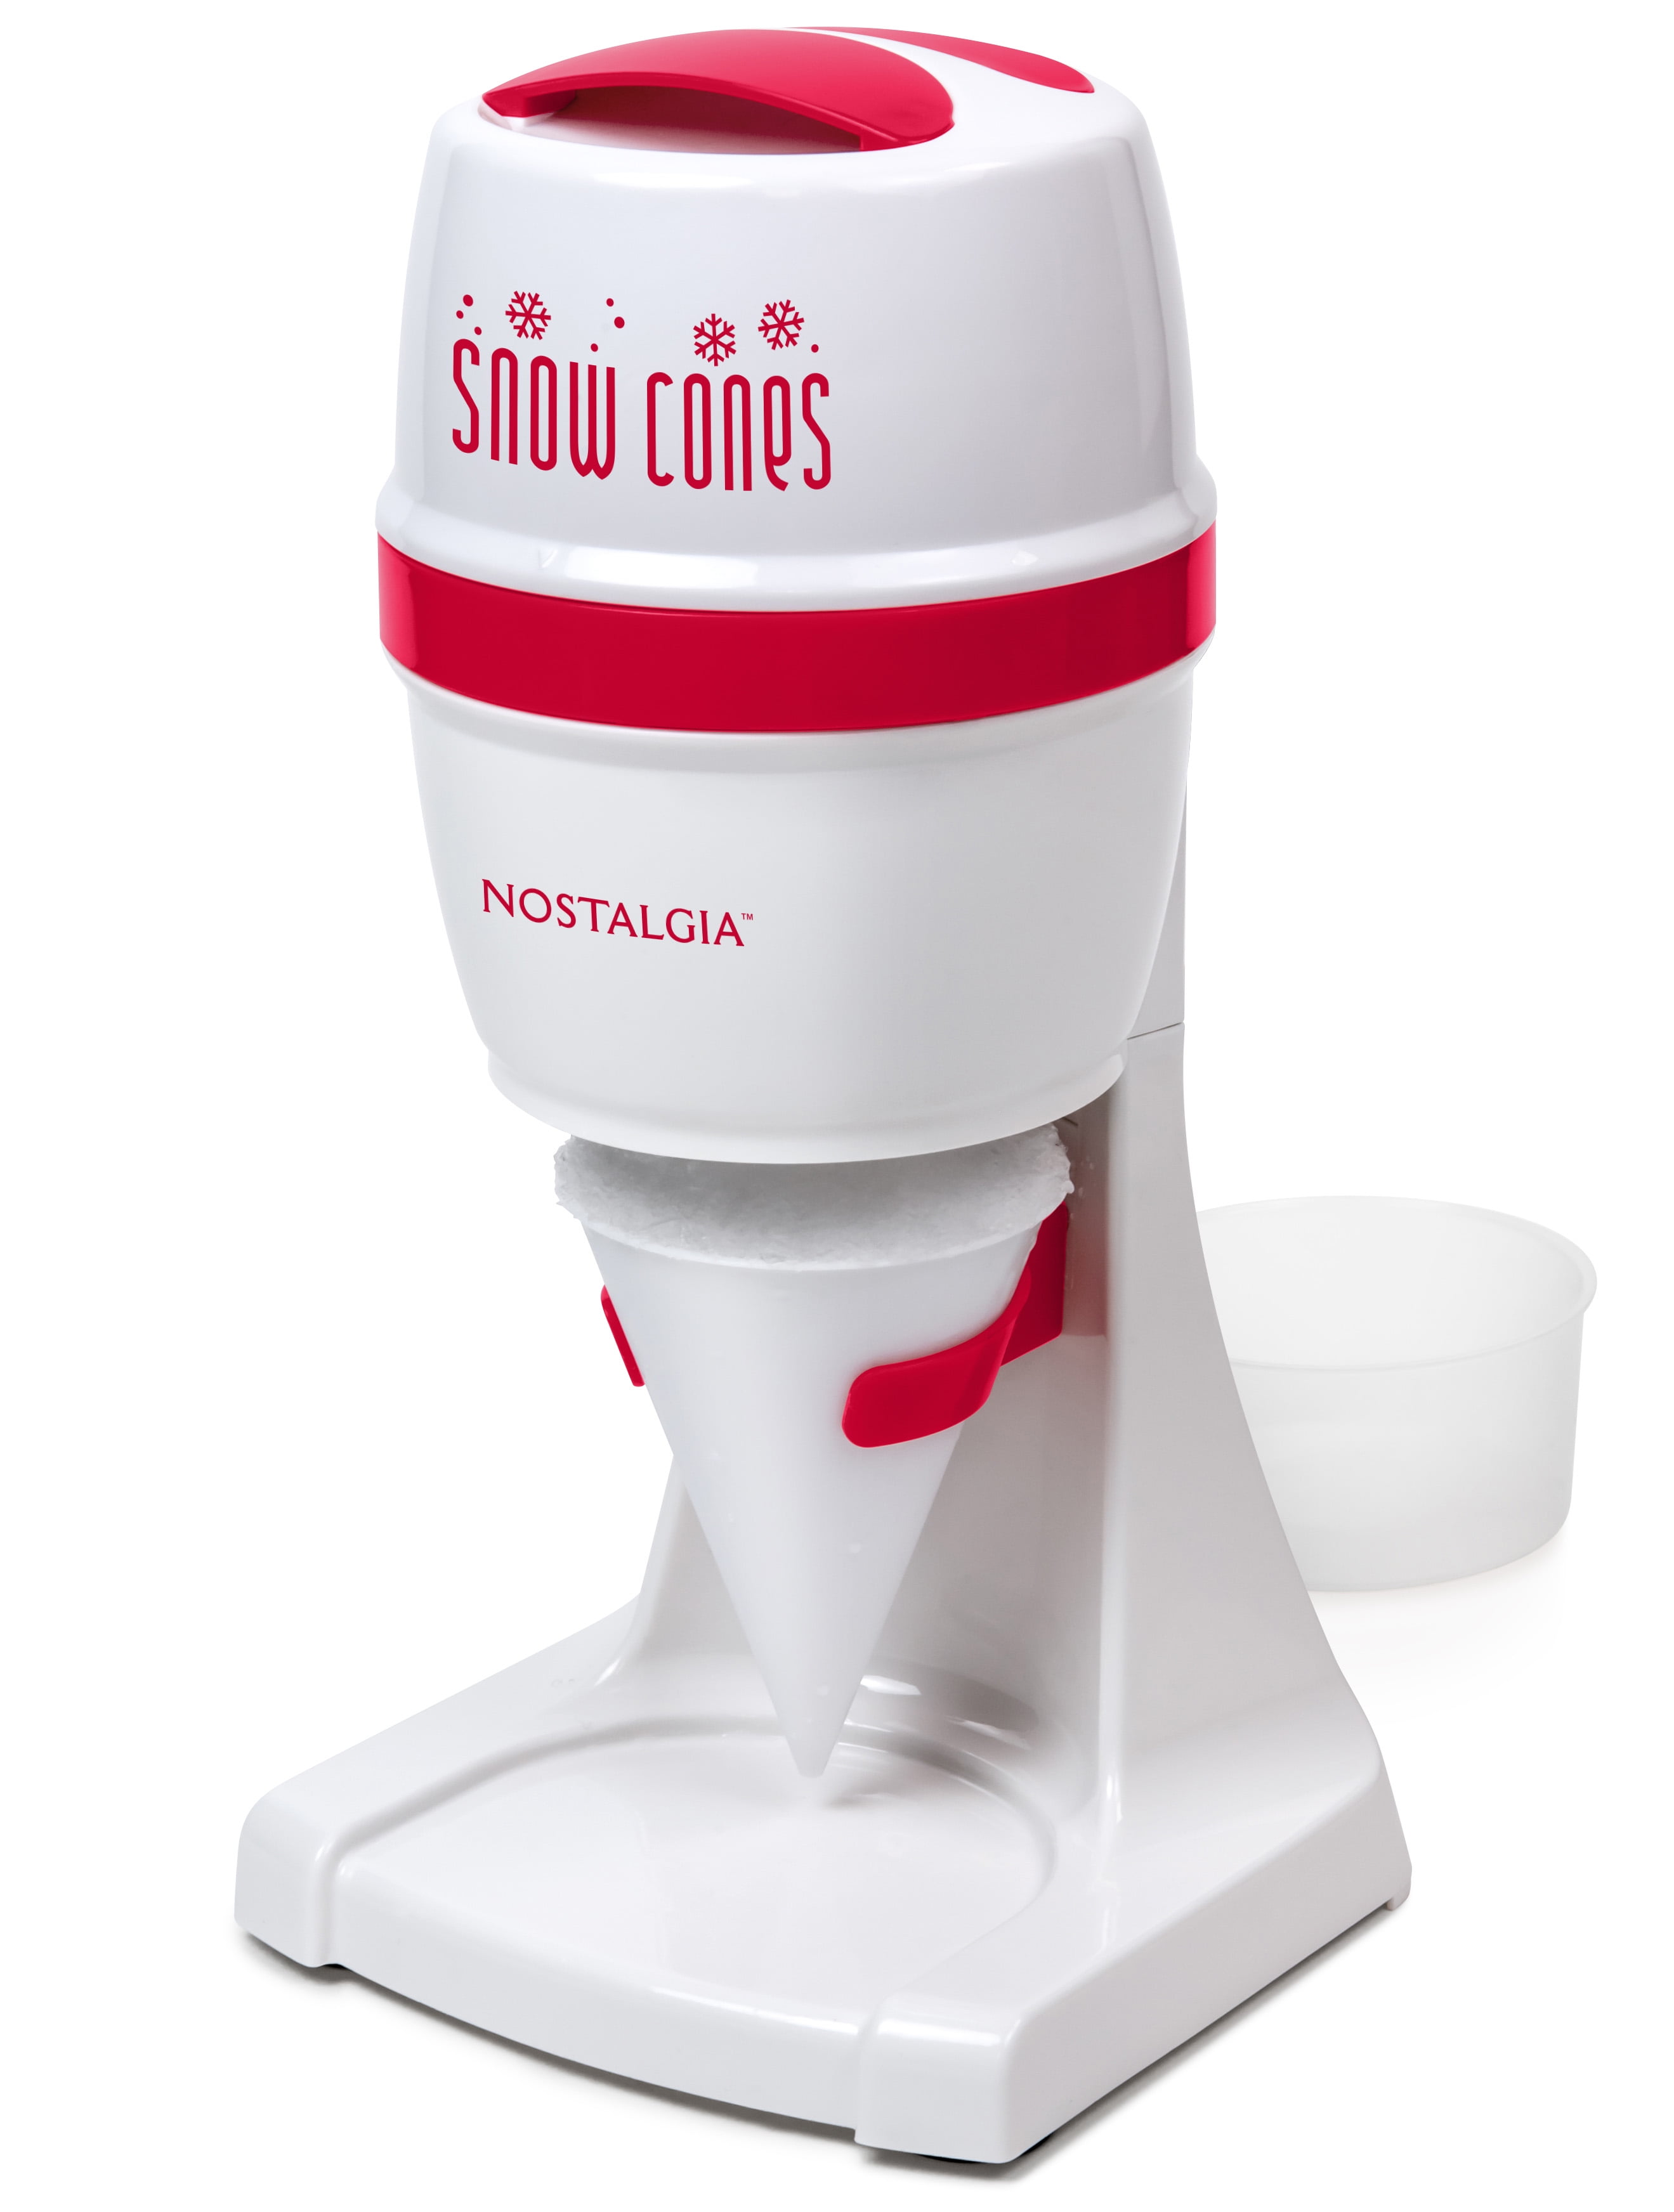 Nostalgia Electrics Nostalgia Electric Hawaiian Shave Ice & Snow Cone Maker,  Includes Reusable Cup And Two Ice Molds, Stainless Steel Blades & Reviews